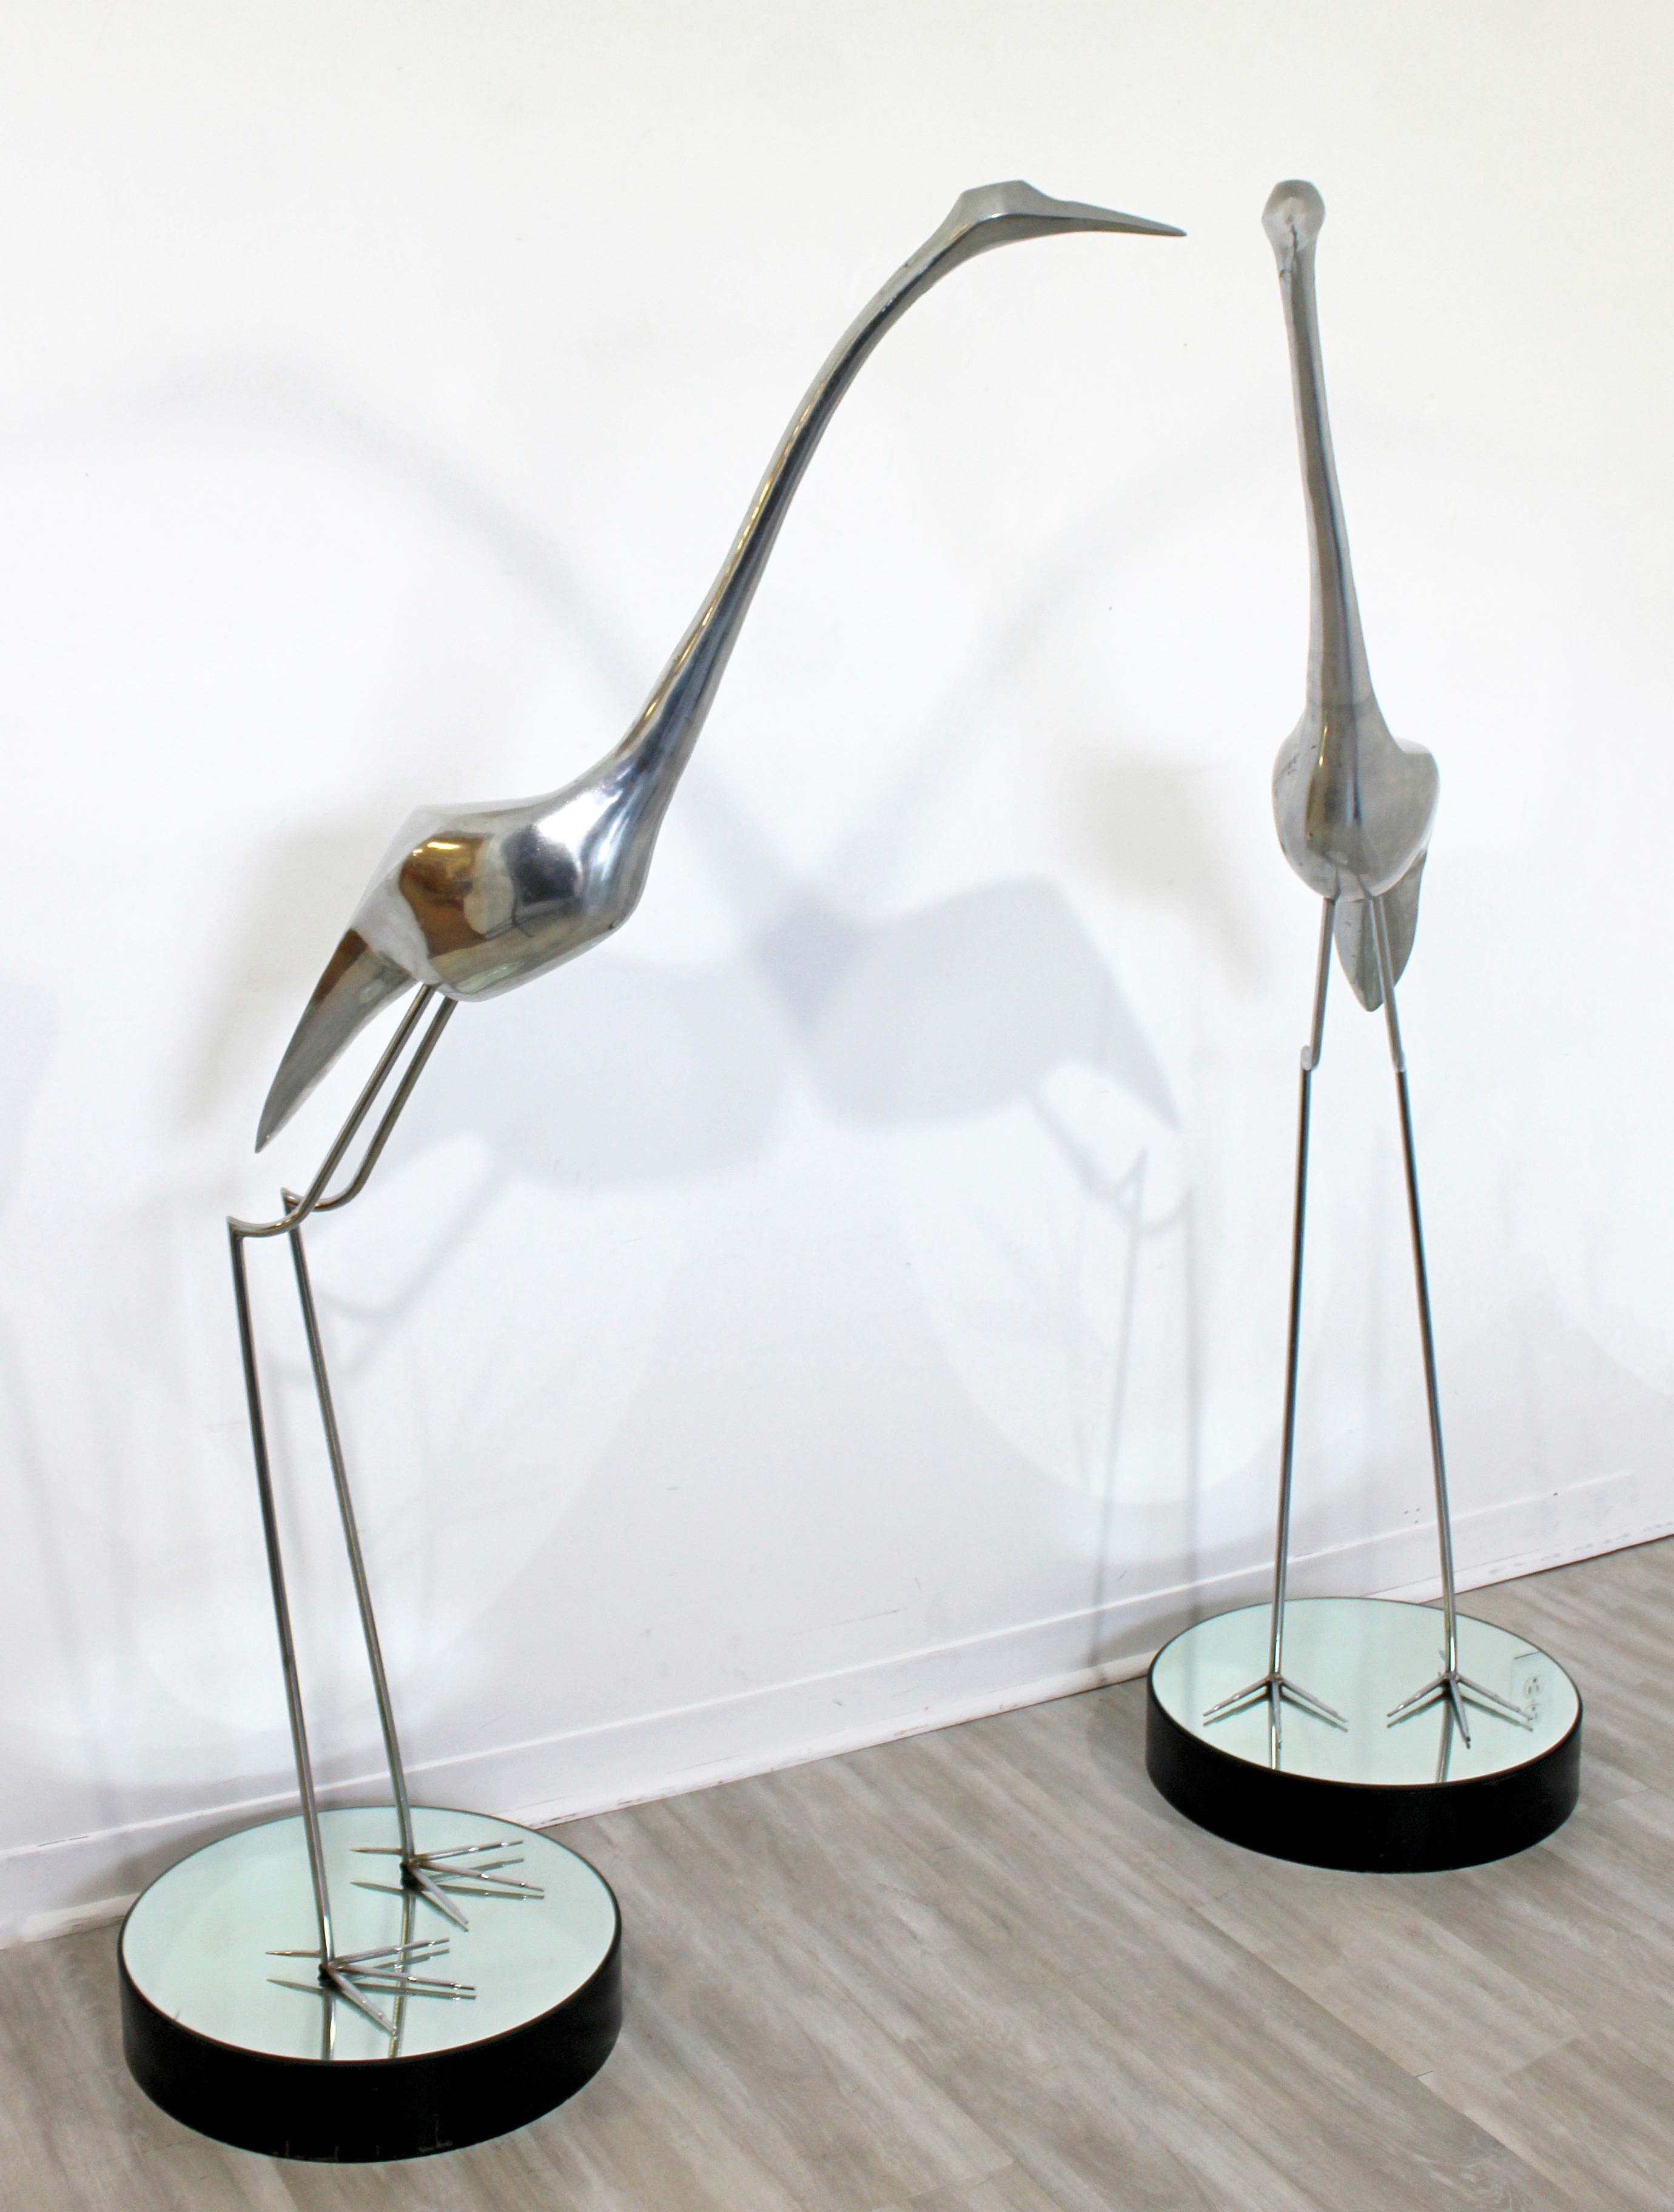 For your consideration is a monumental pair of aluminum and chrome floor sculptures of herons, by Curtis Jere, circa 1970s. In excellent vintage condition. The dimensions of each are 36